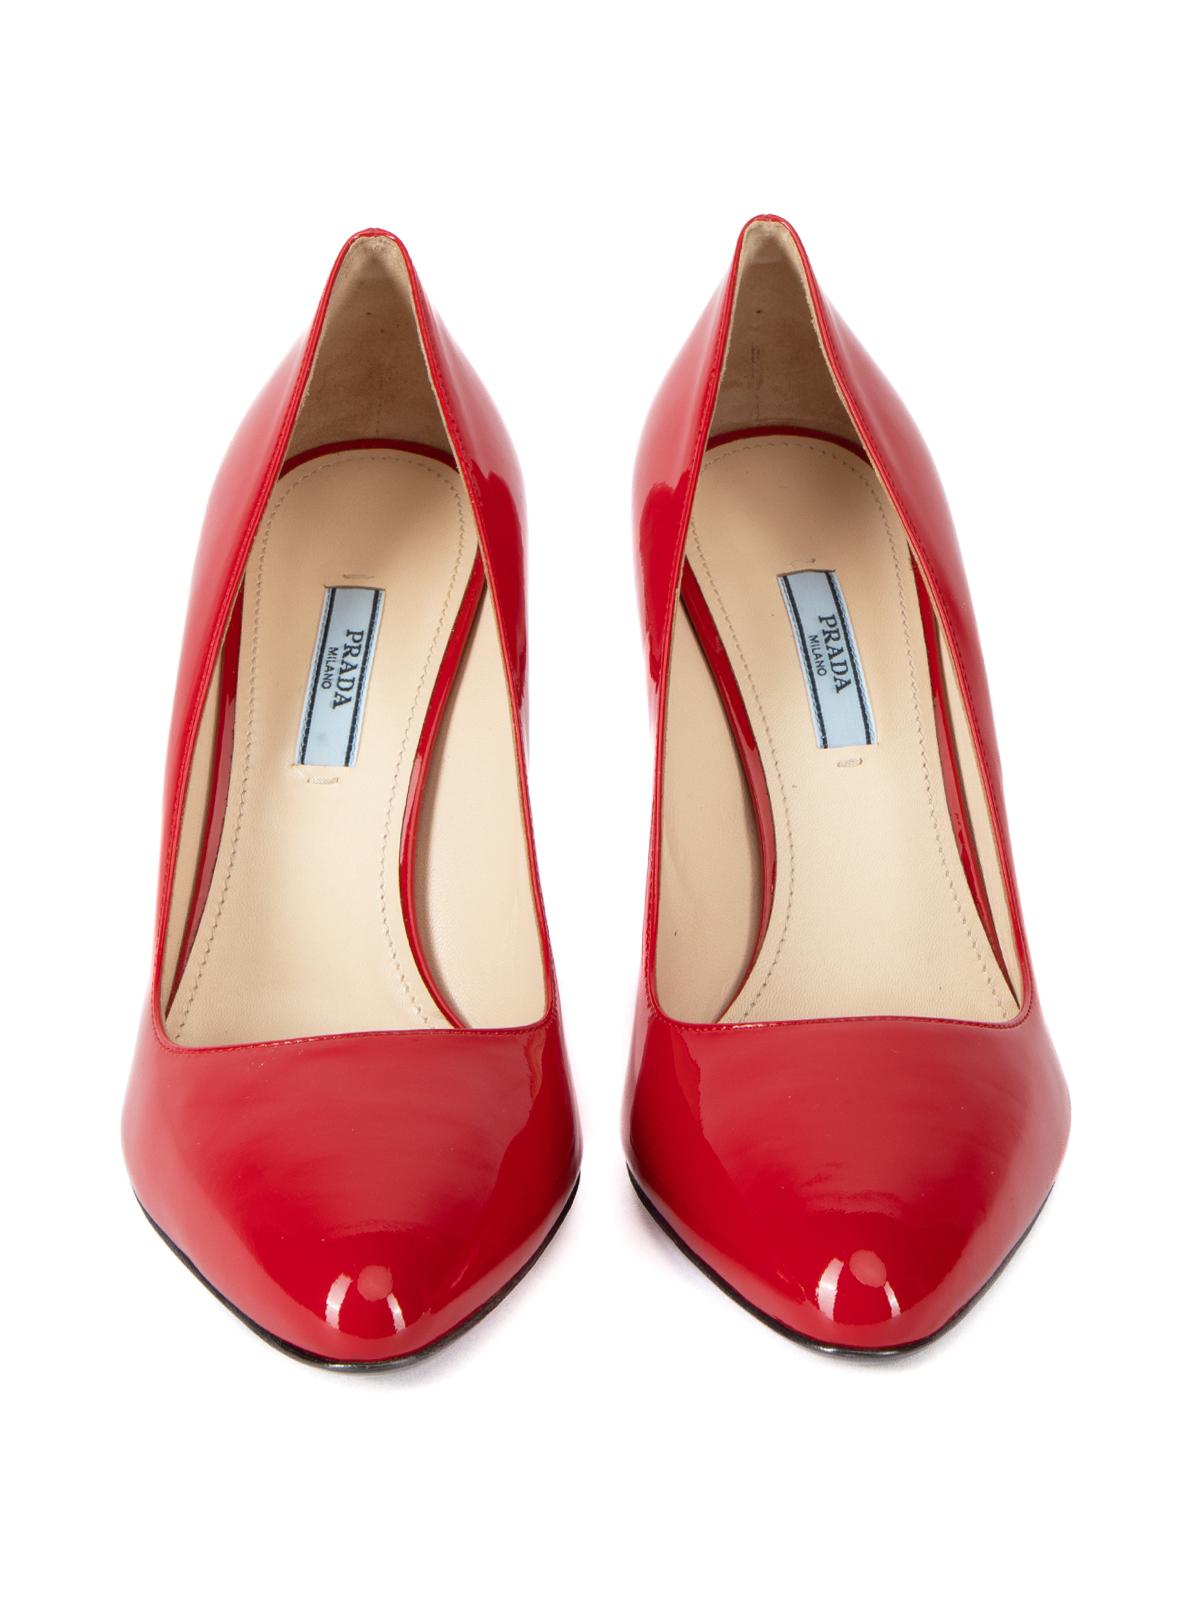 Prada Women's Calzature Donna Red Patent Leather Pumps In Excellent Condition In London, GB